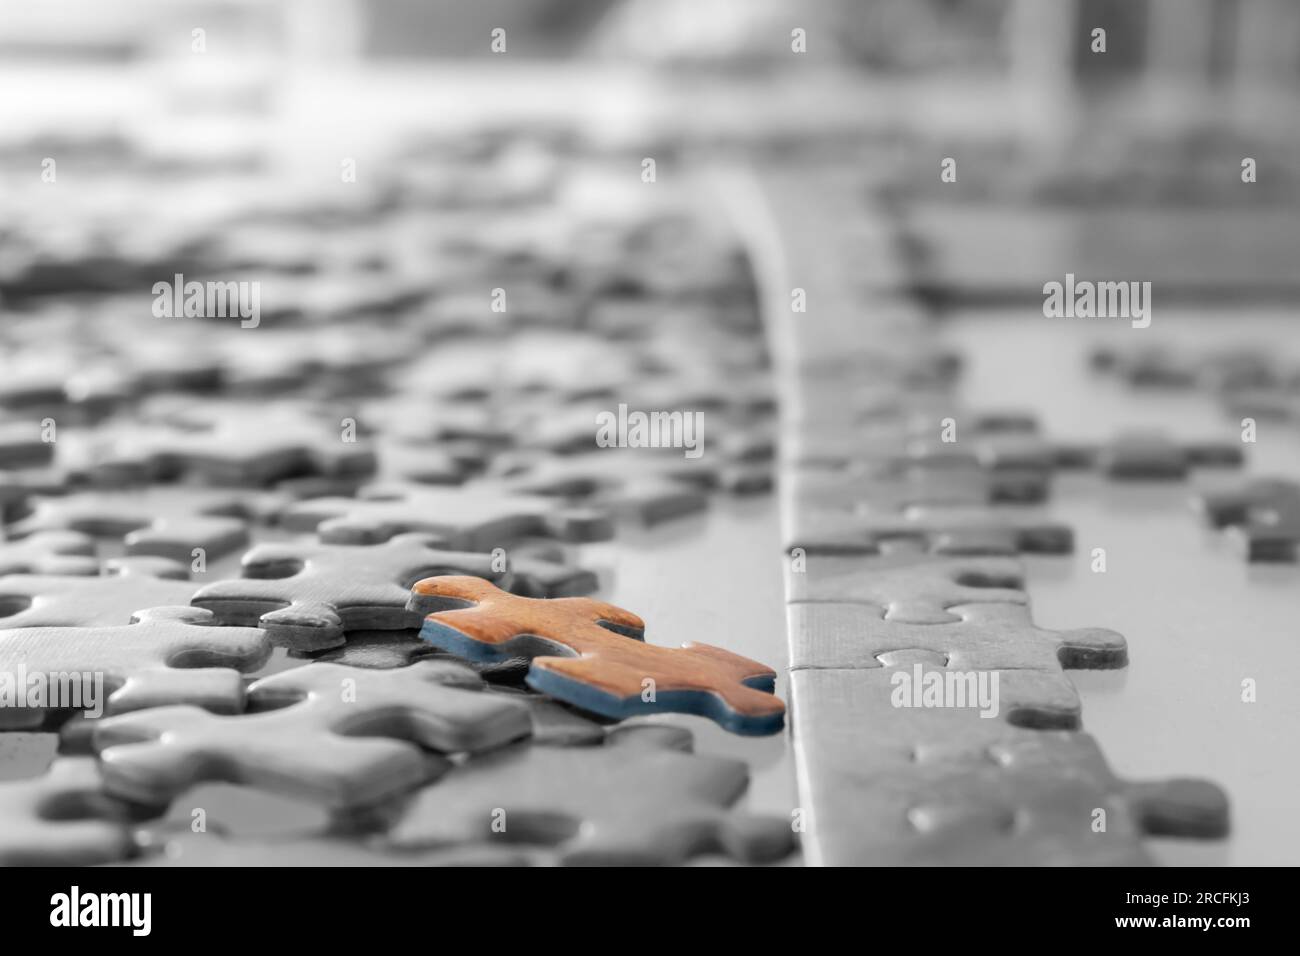 Close-up shot of the pieces of a jigsaw puzzle. Cluttered pieces are out of focus and in black and white, focused piece is in color. Concepts Stock Photo